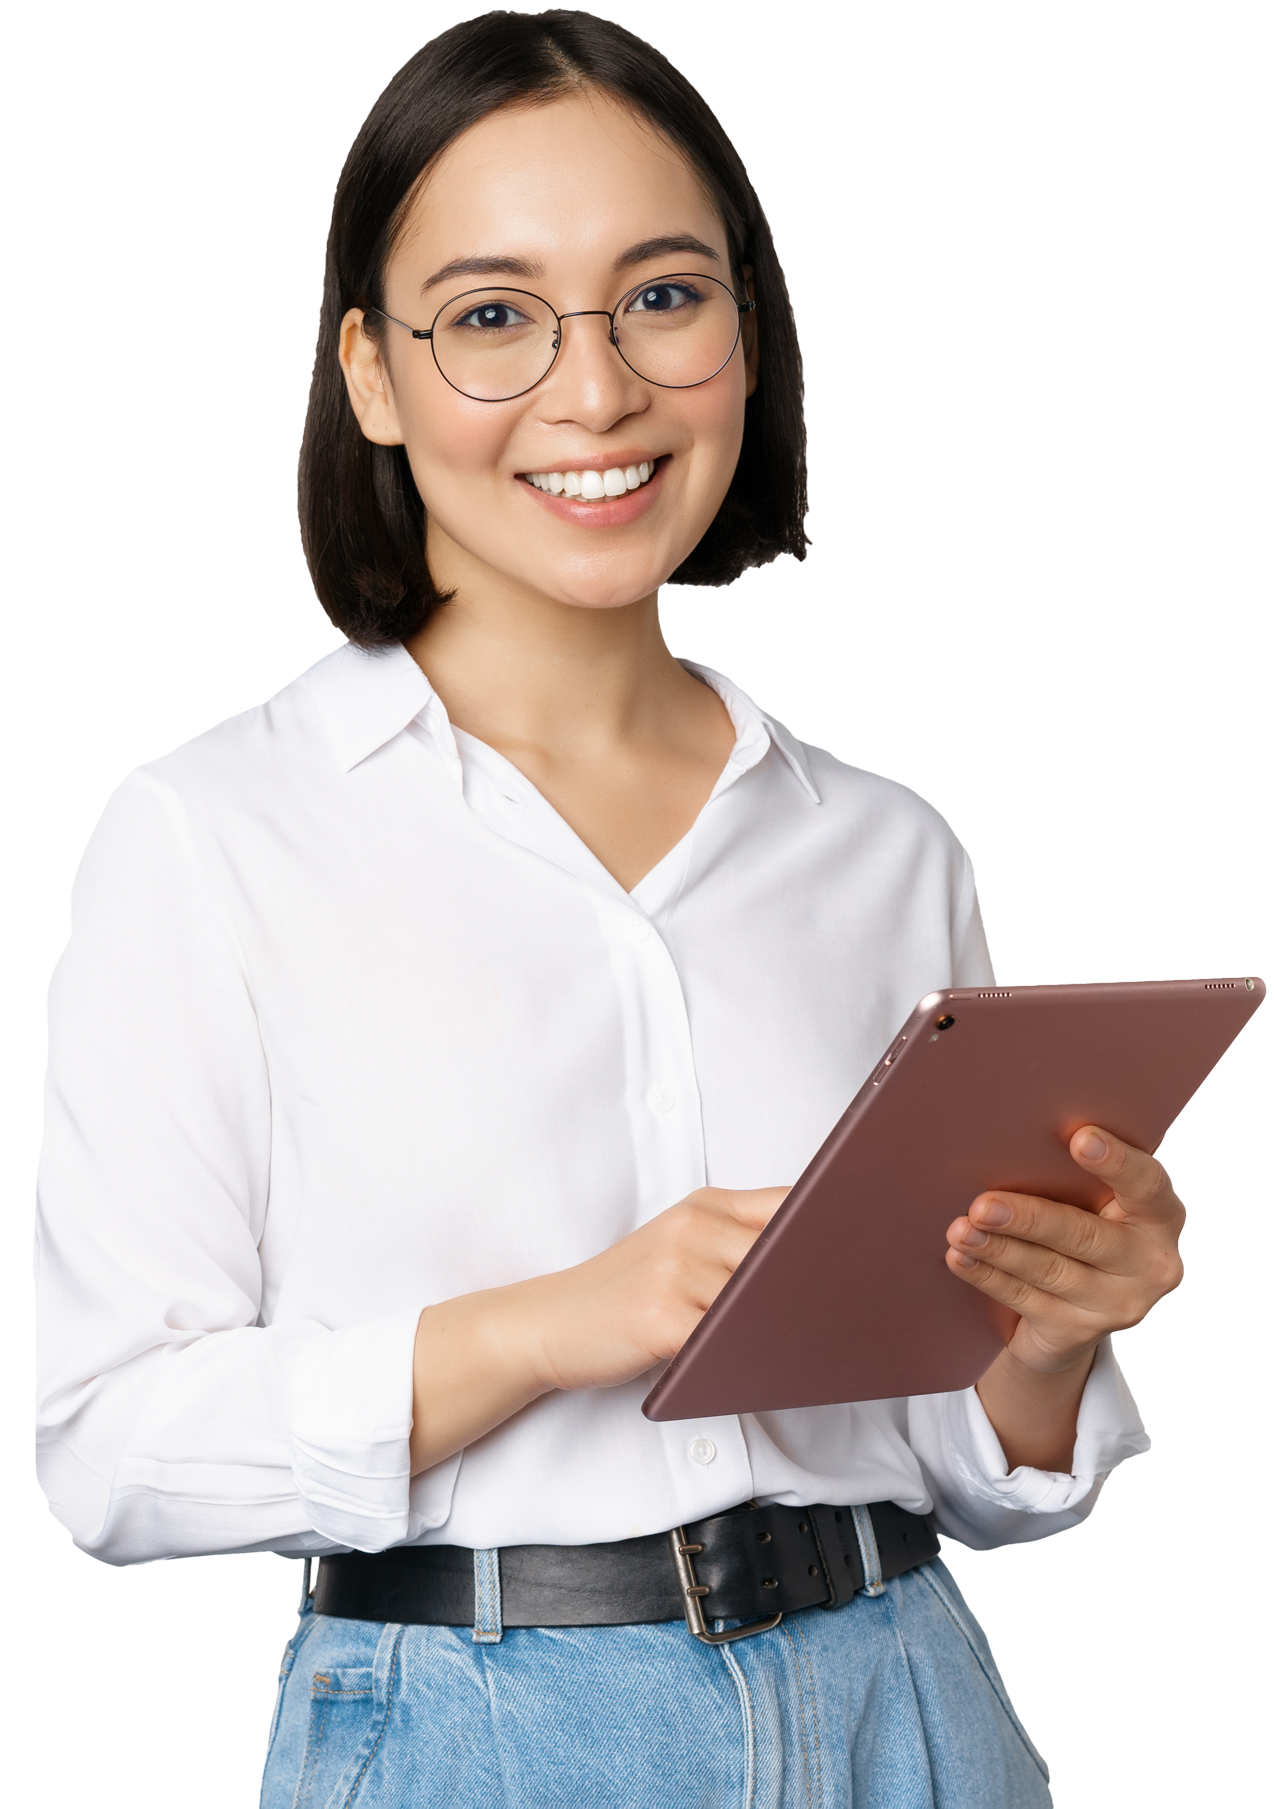 young woman in business casual wear using an ipad